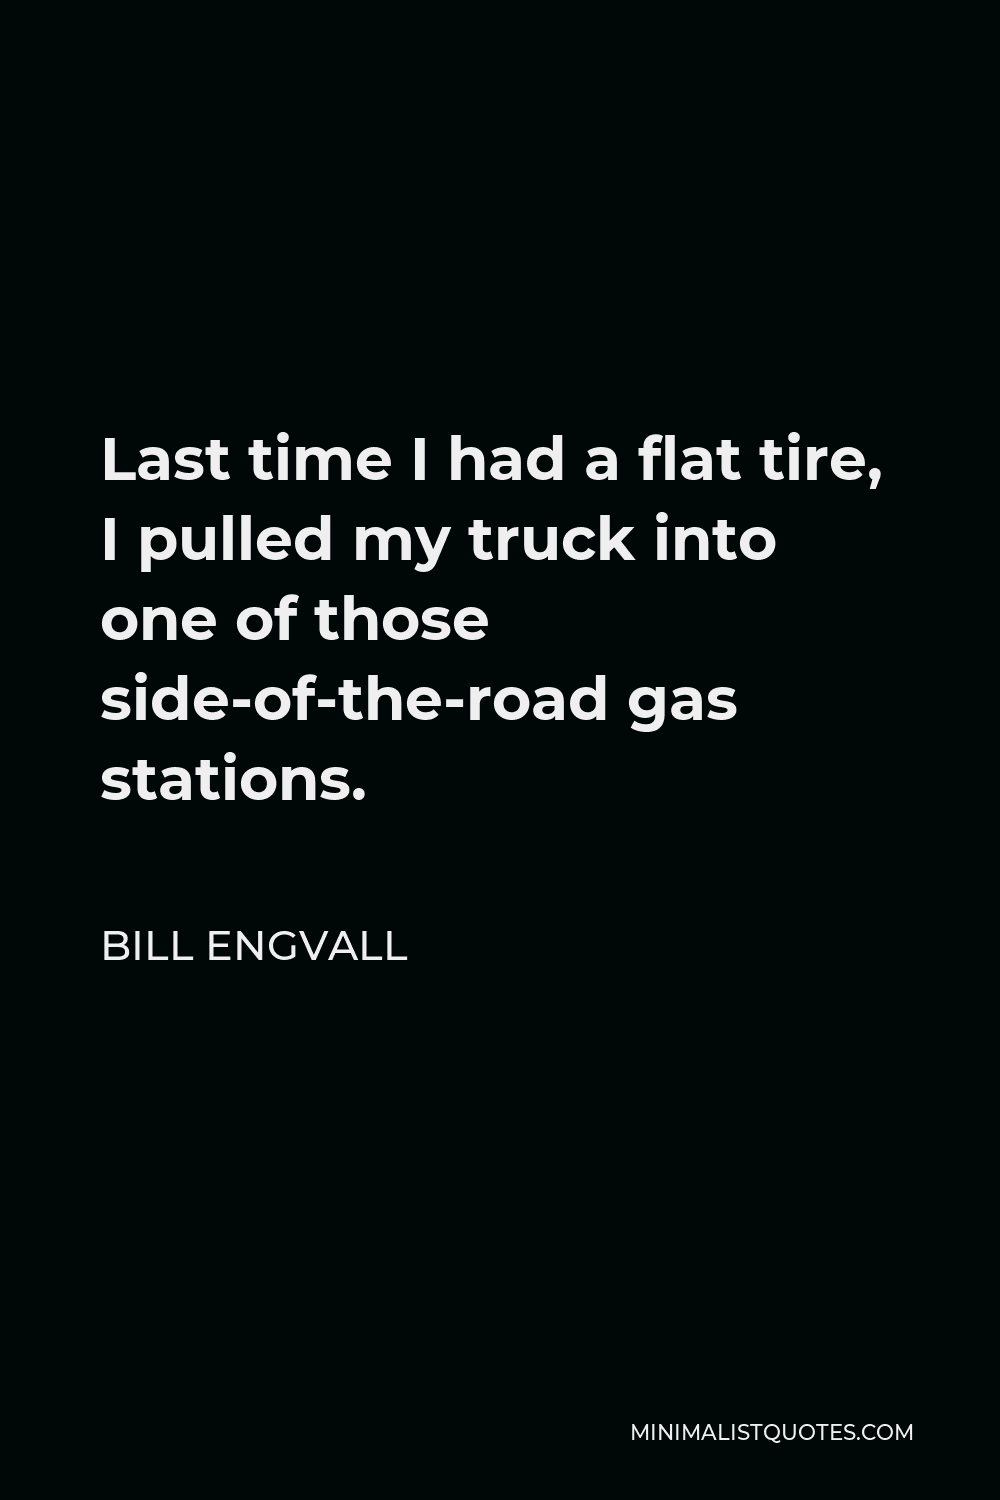 Bill Engvall Quote - Last time I had a flat tire, I pulled my truck into one of those side-of-the-road gas stations.